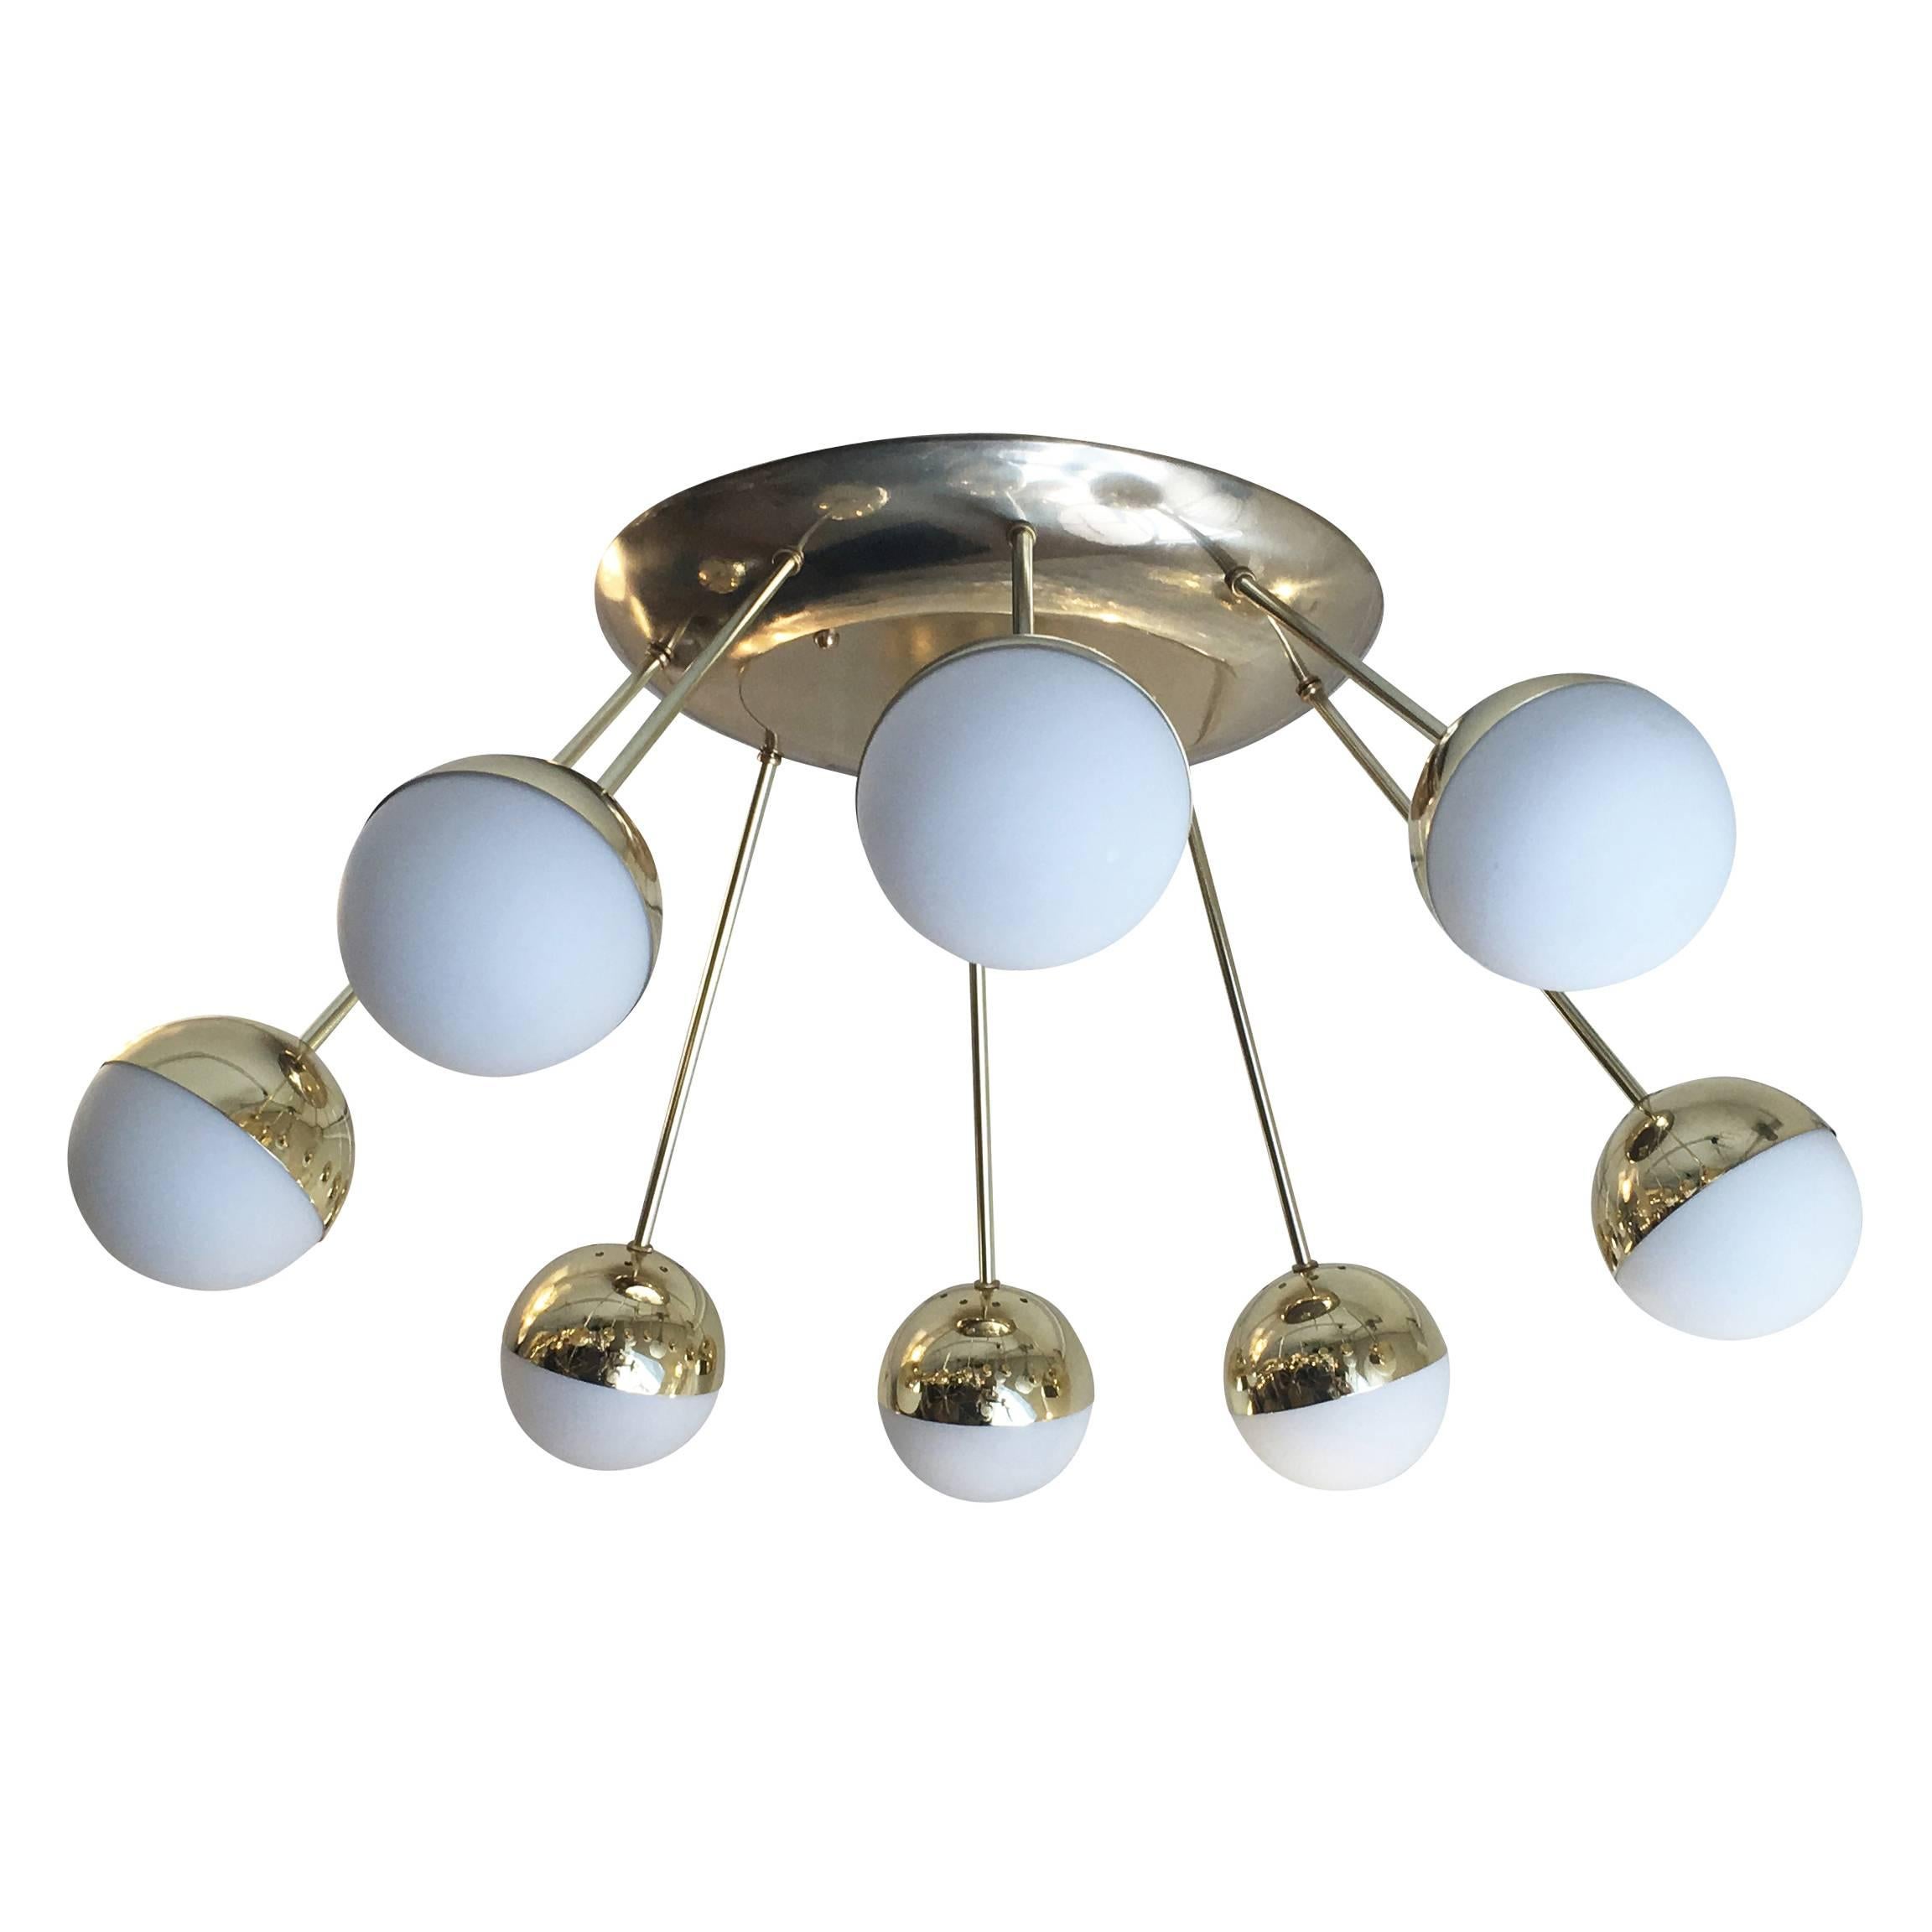 Flush mount fixture composed of eight frosted glass globes departing from a large oval canopy. The globe holders are brass while the canopy is brass plated cast aluminium. Custom produced in late, 1990s for a villa in Italy. Two available.
